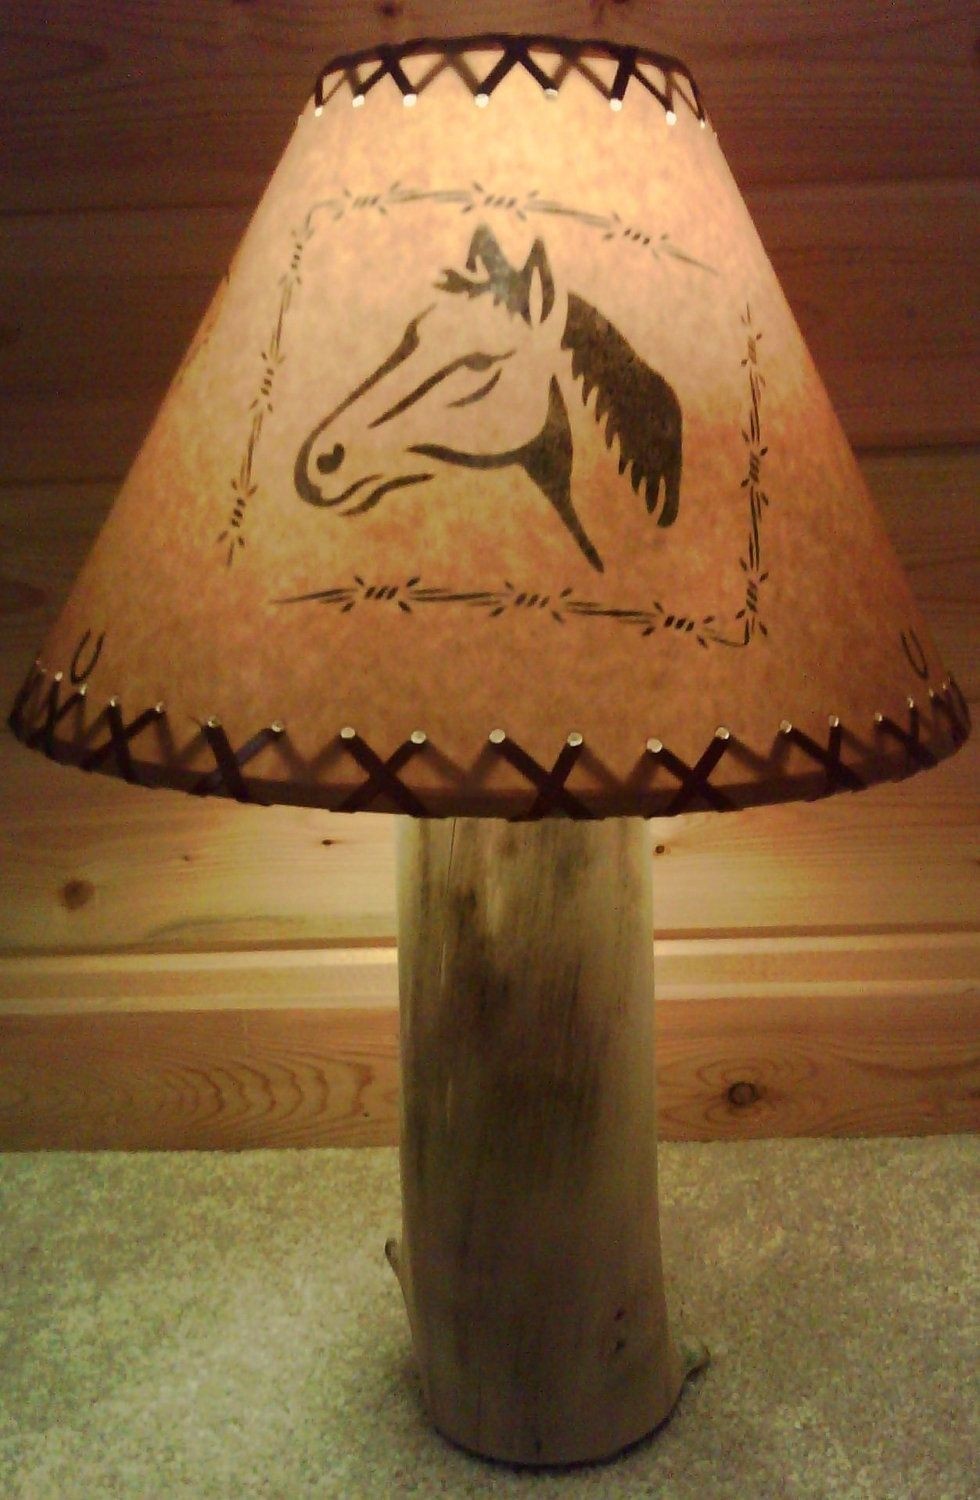 Cowboy Boots Spurs Rope Lasso Rodeo Cotton Fabric Lampshade Lamp Shade 